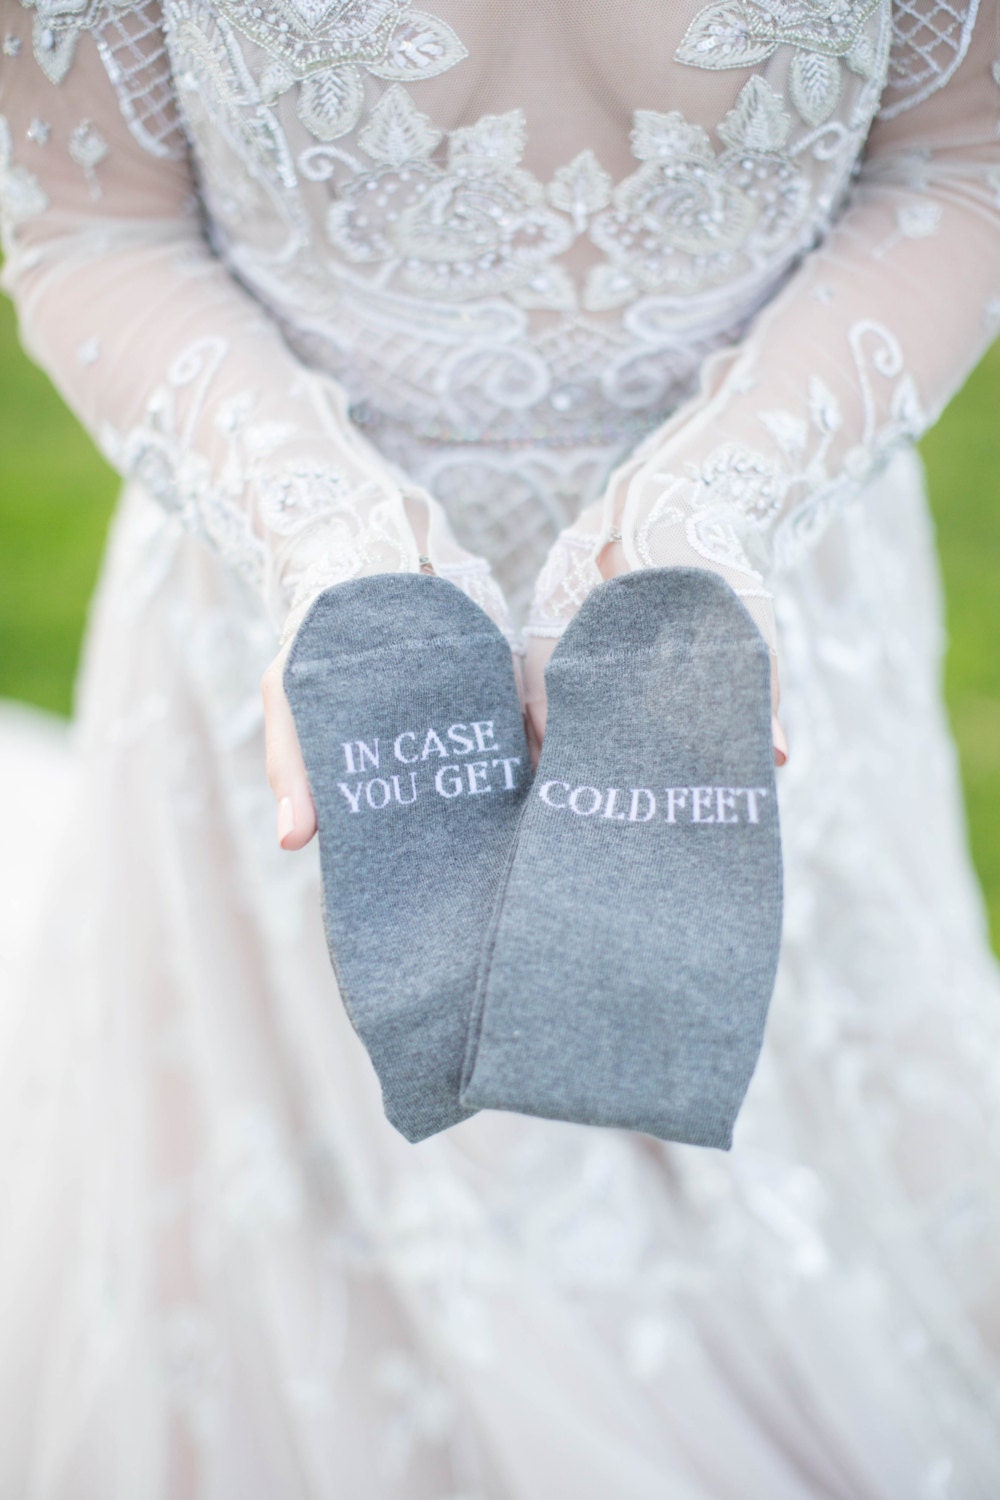 In Case You Get Cold Feet Socks Wedding Grooms Socks Cold | Etsy